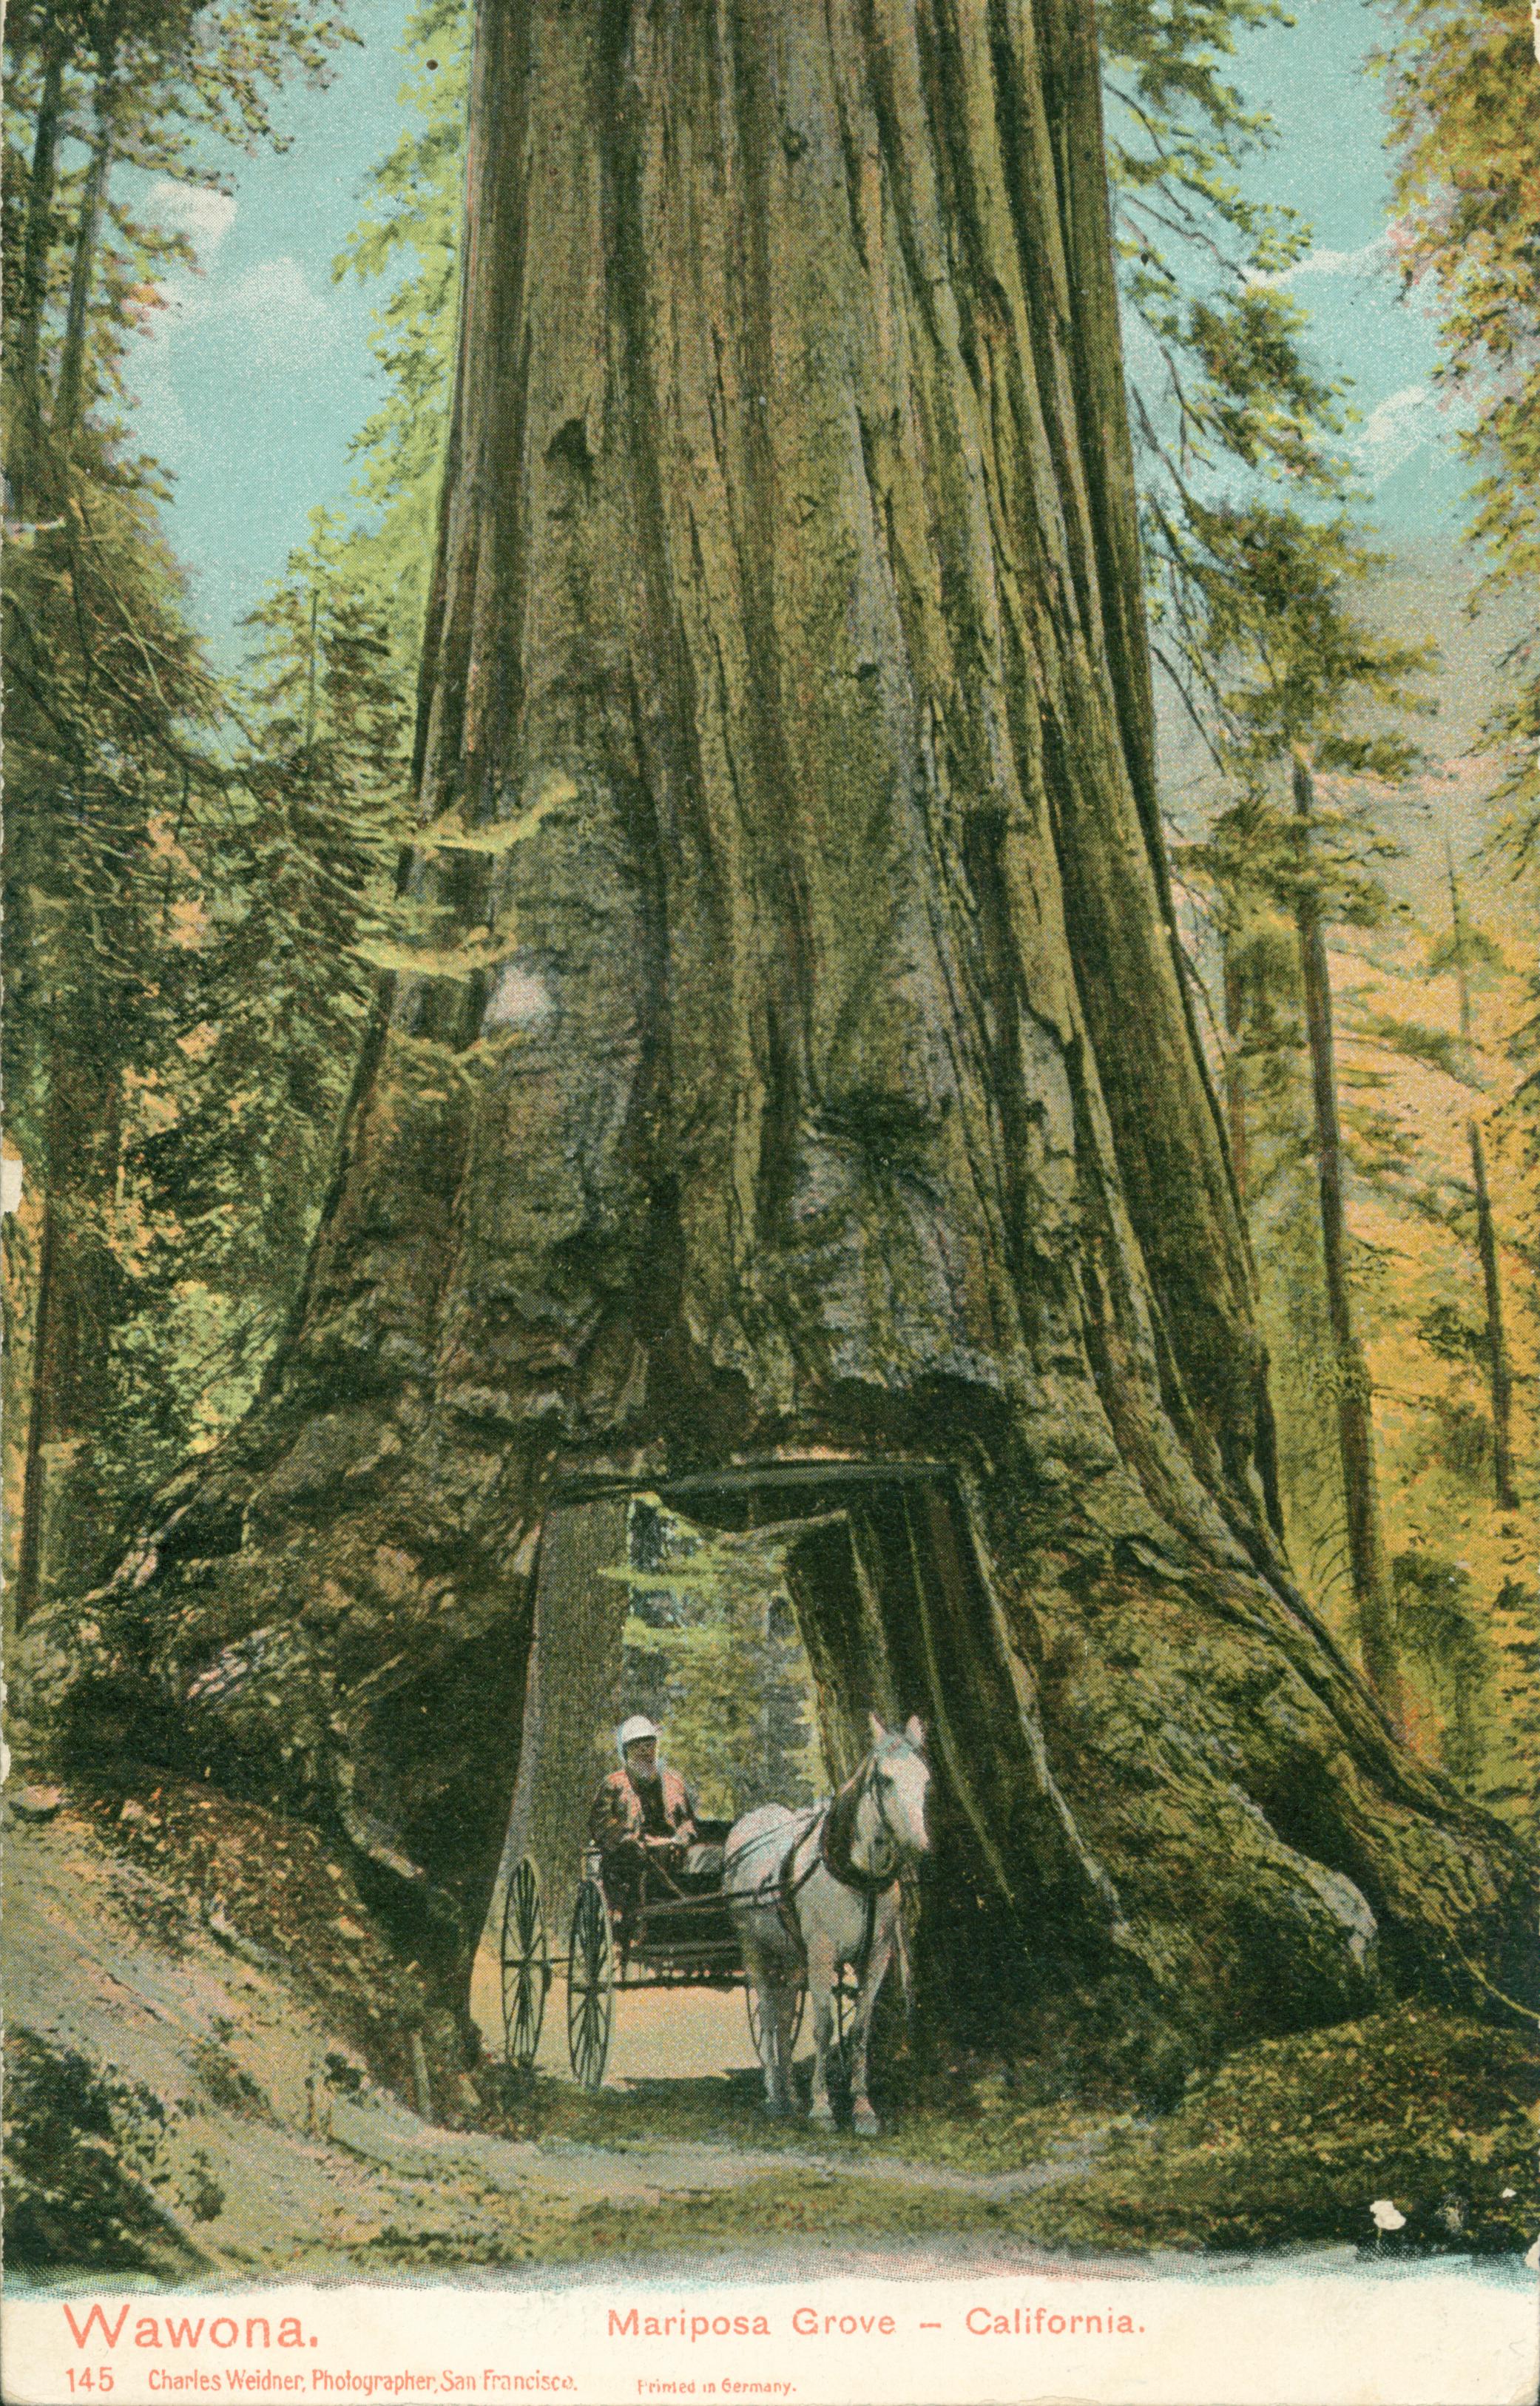 Shows a carriage with one person driving through the Wawona tree